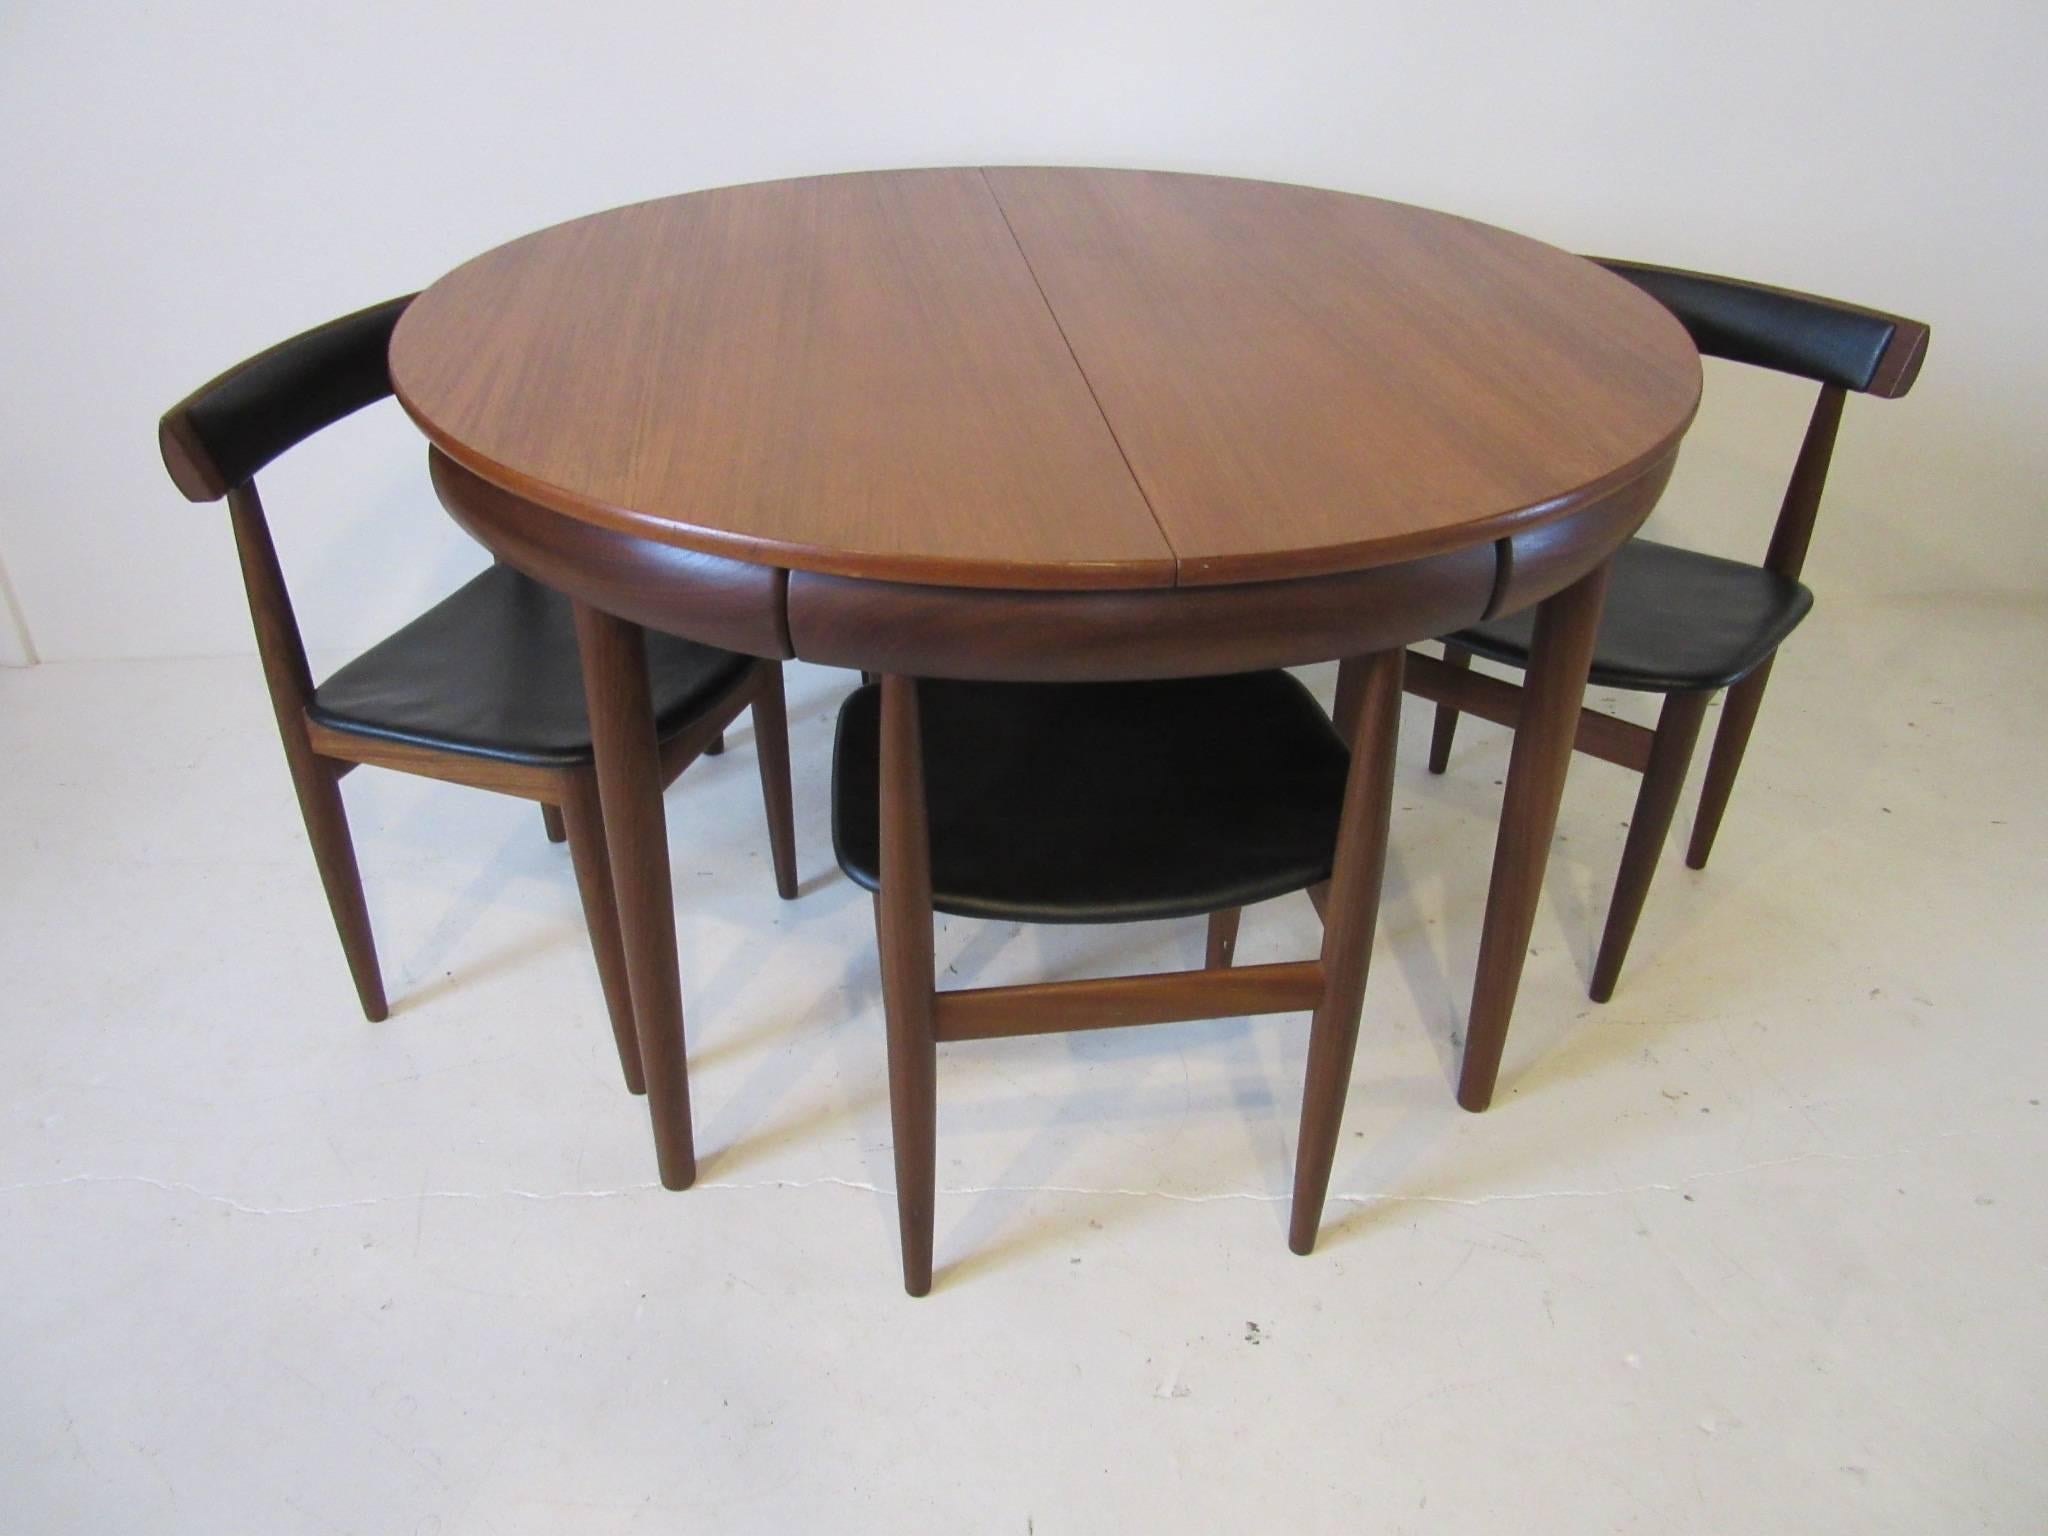 An expanding dining table with flip up hidden leaf and four chairs that integrate into the top of the table to form a perfect circle. The top is constructed of light teak and the chairs and table frame from very dark teak wood. An interesting space